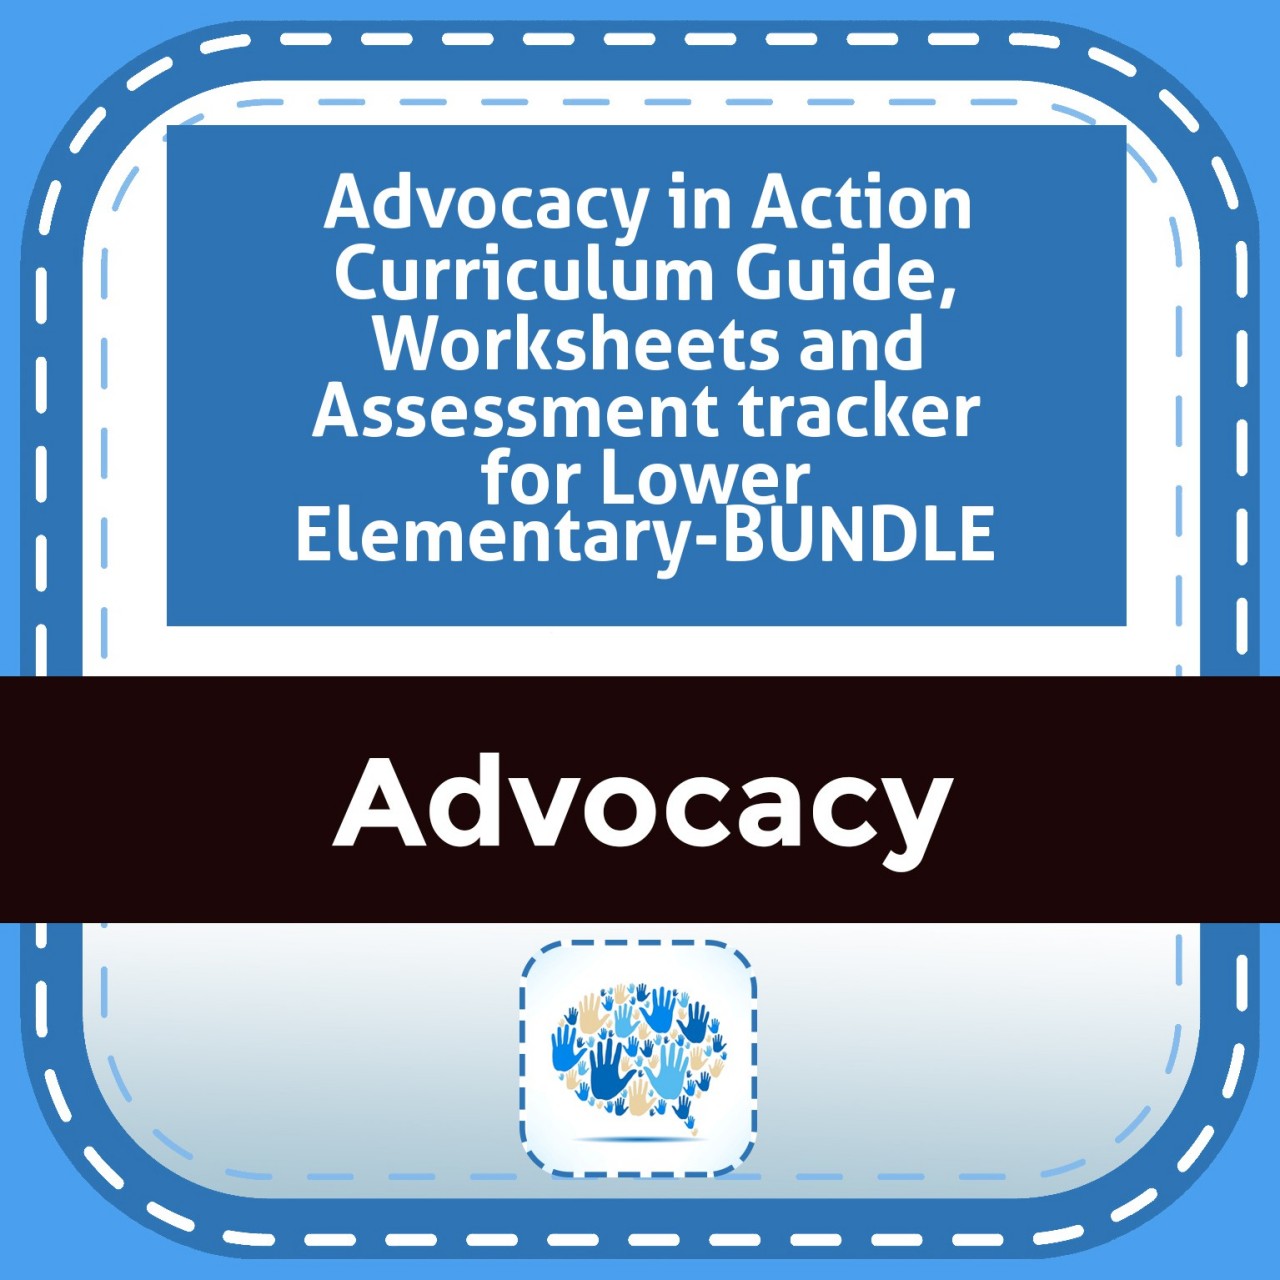 Advocacy in Action Curriculum Guide, Worksheets and Assessment tracker for Lower Elementary-BUNDLE